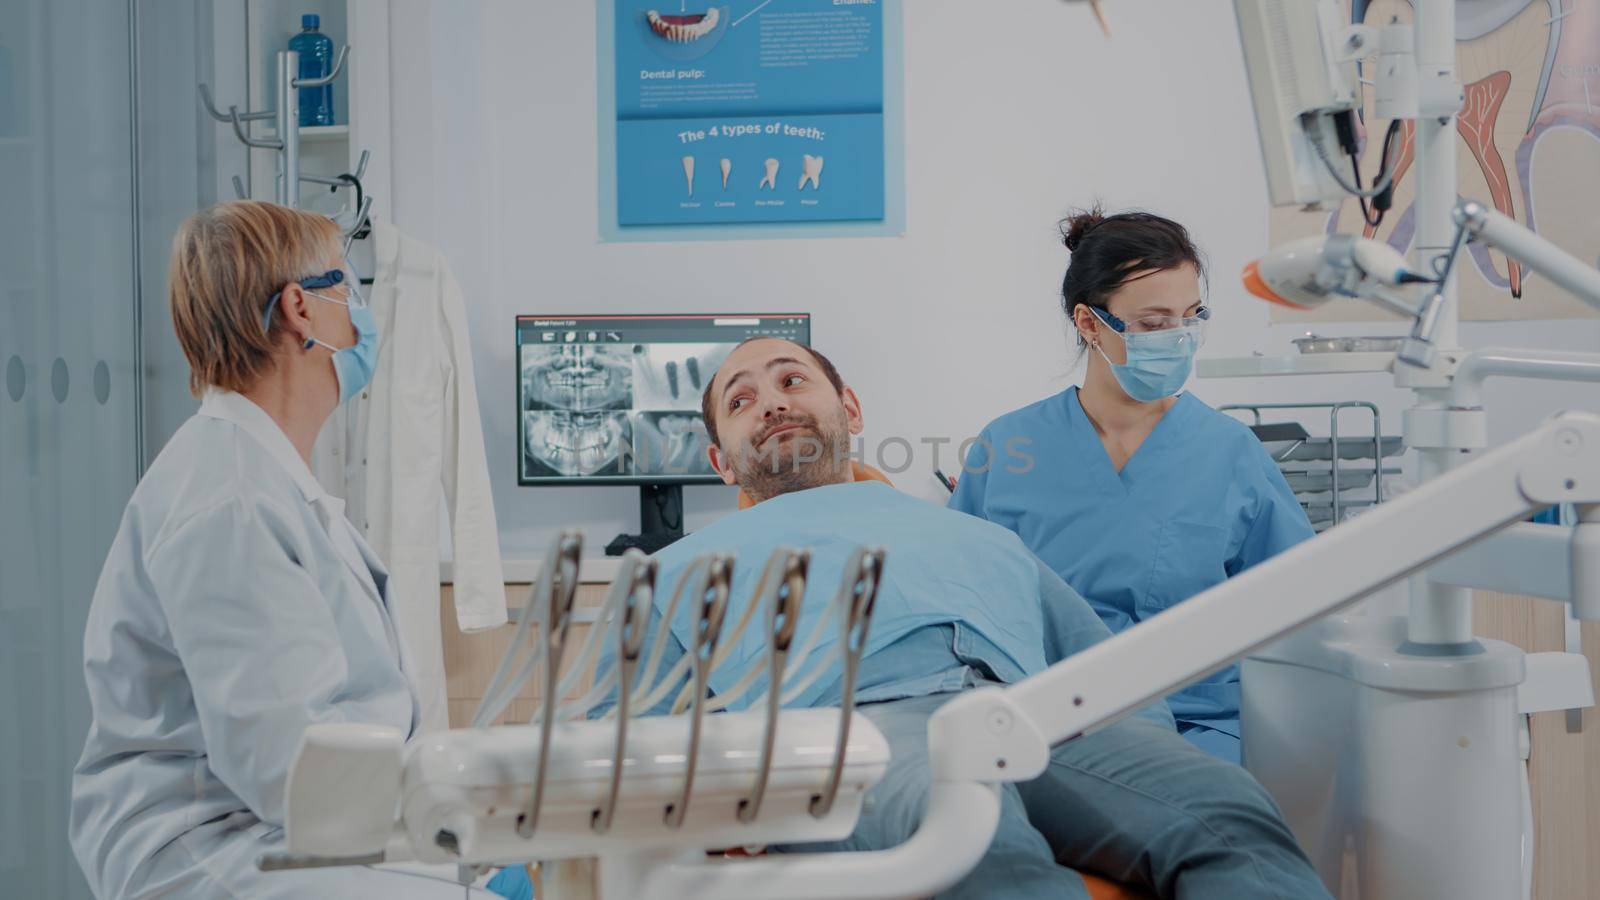 Stomatologist and nurse finishing oral care procedure with patient in dentistry office. Dentist giving mirror to man to look at denture results after surgery and dental examination.